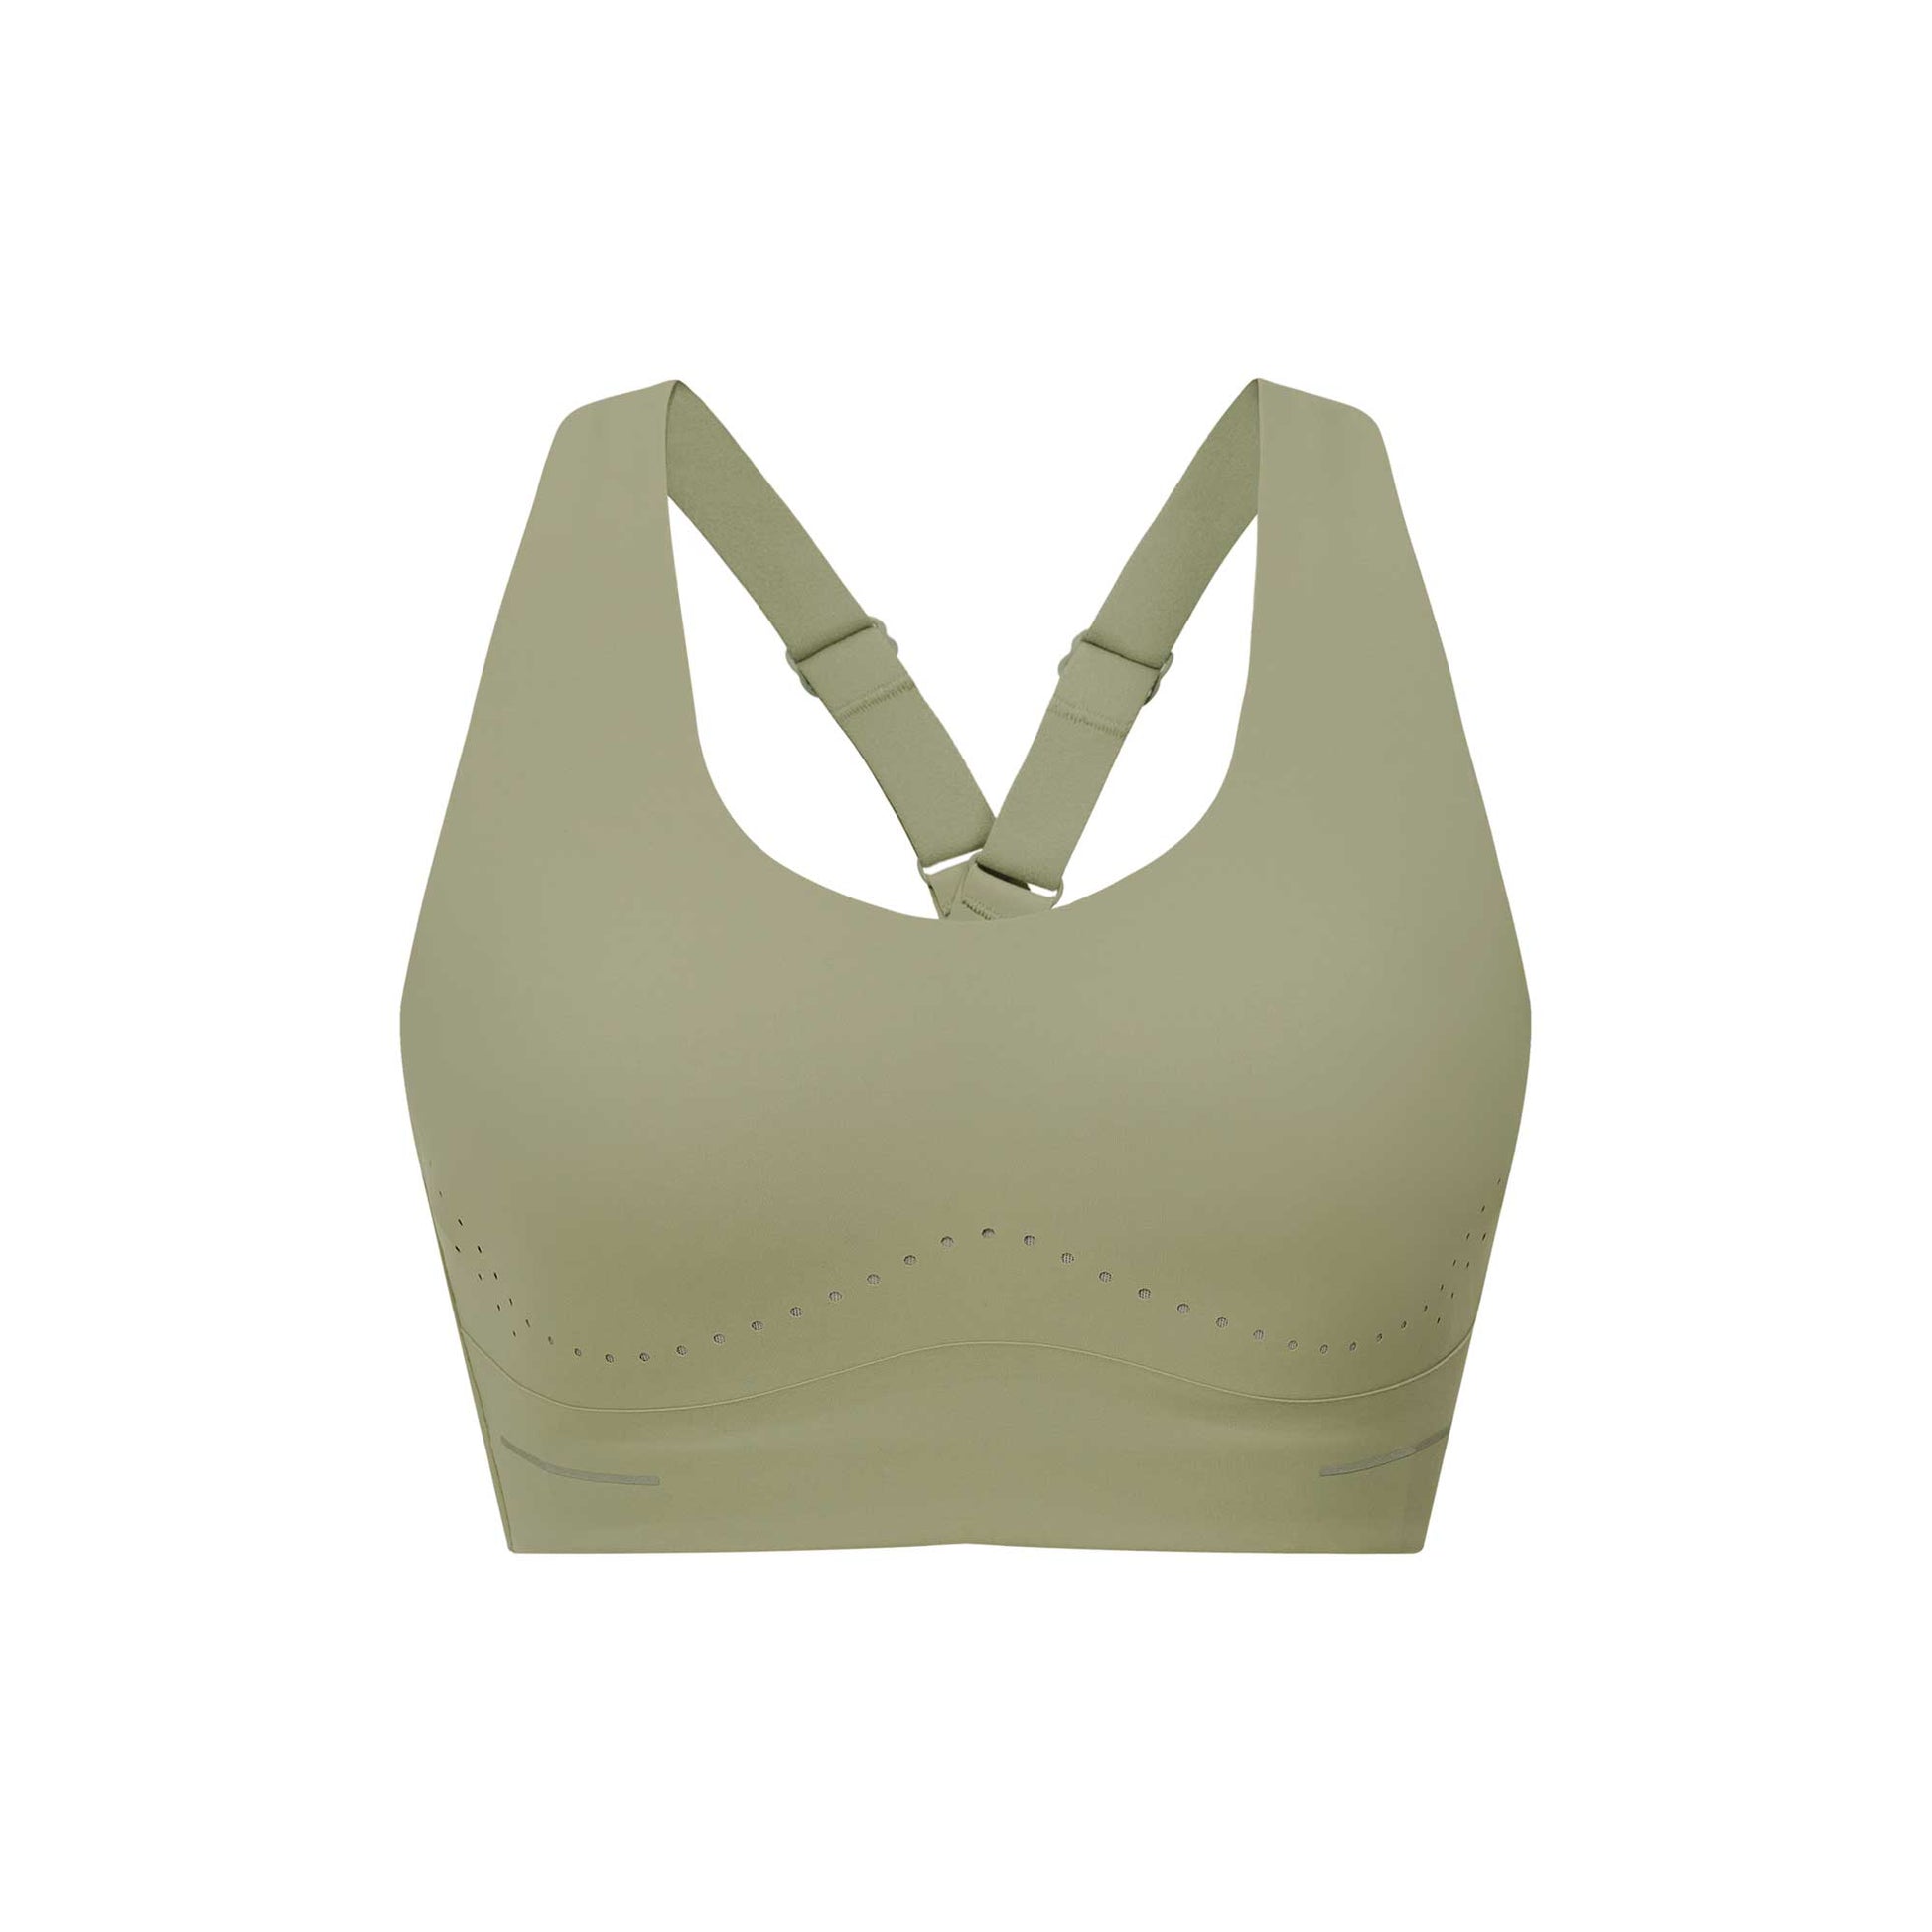 Sports Bras For Women Gym Running, Unique Cross Back Strappy & Honeycomb  Design Front,mid Impact Seamless Yoga Bralette-green(xl)